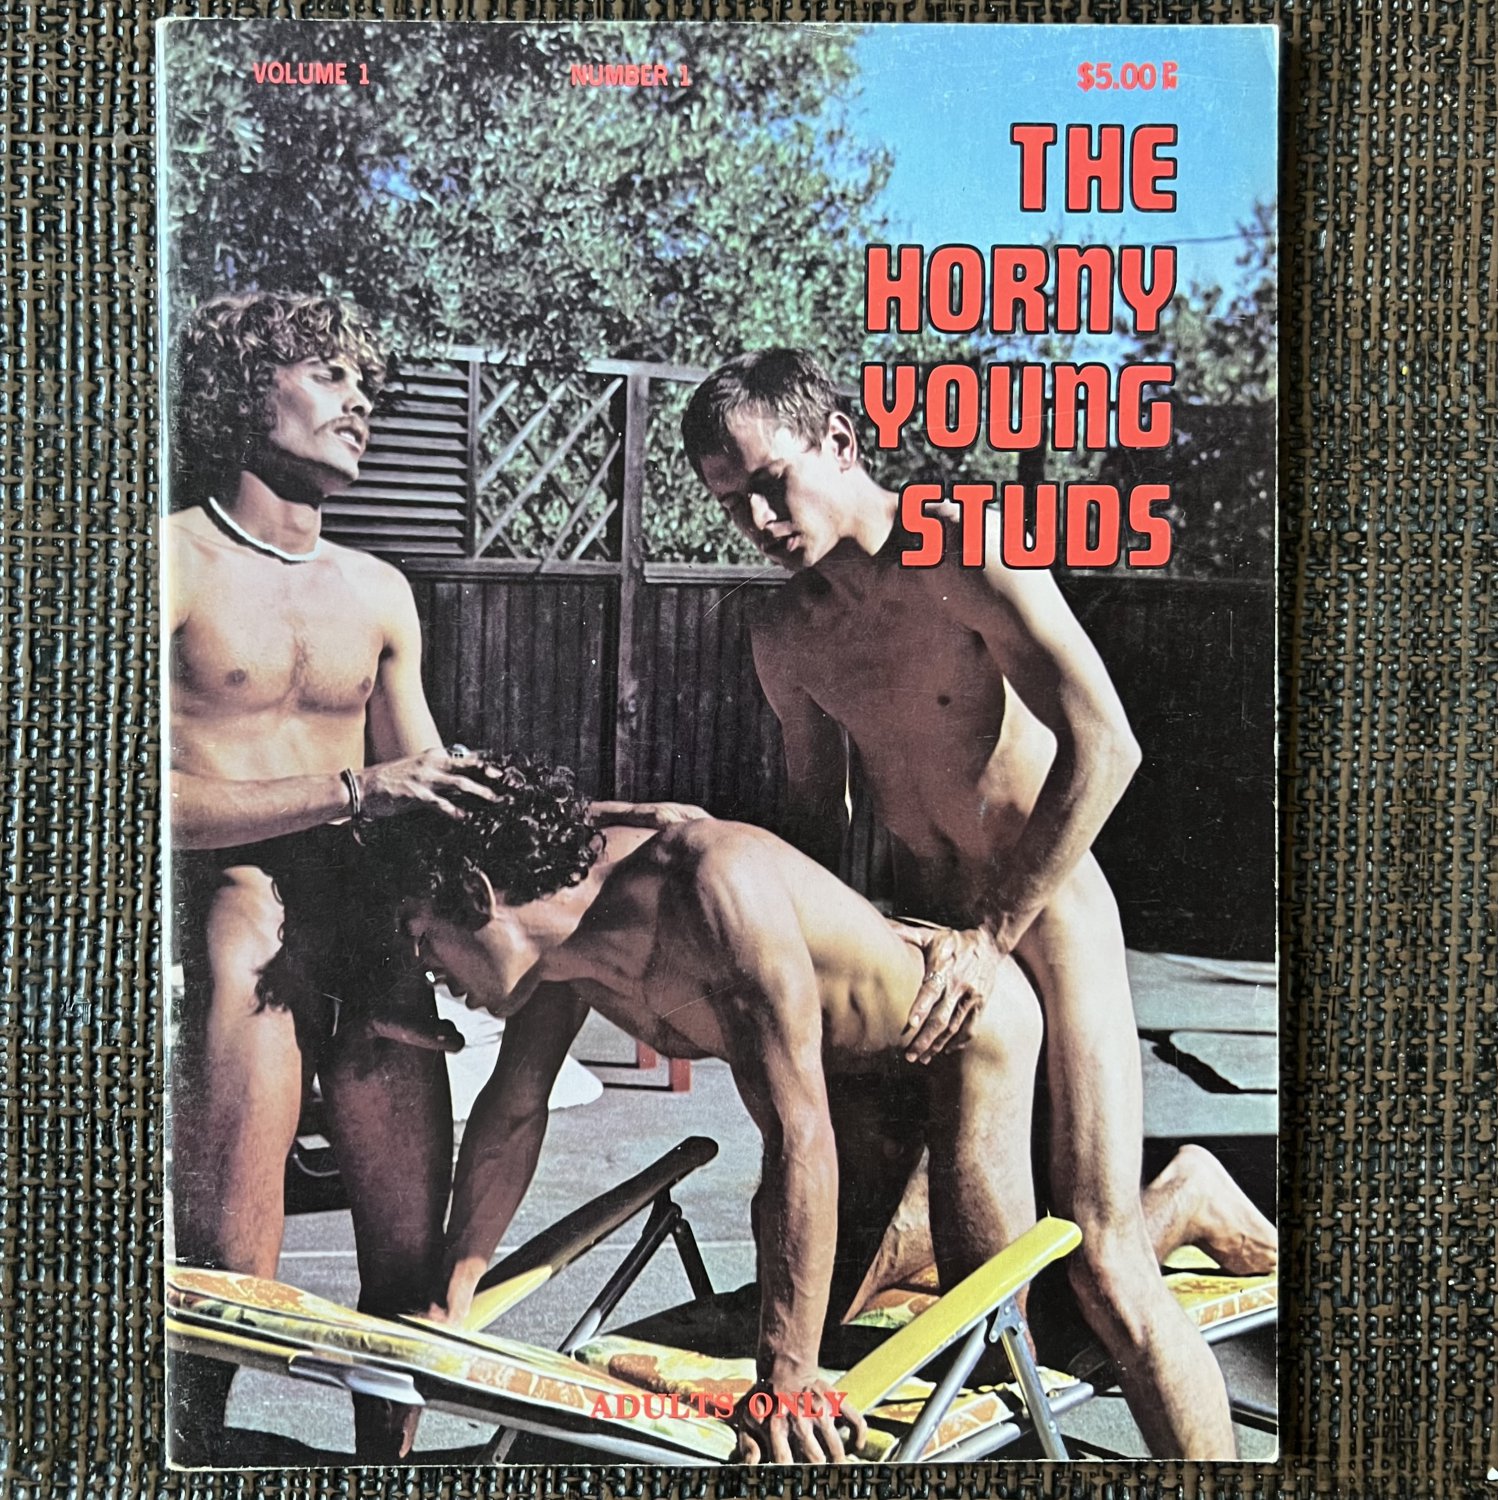 THE YOUNG HORNY STUDS (1975) Gay PULP PICTORIAL Vintage Artistic Photos Magazine Nudes